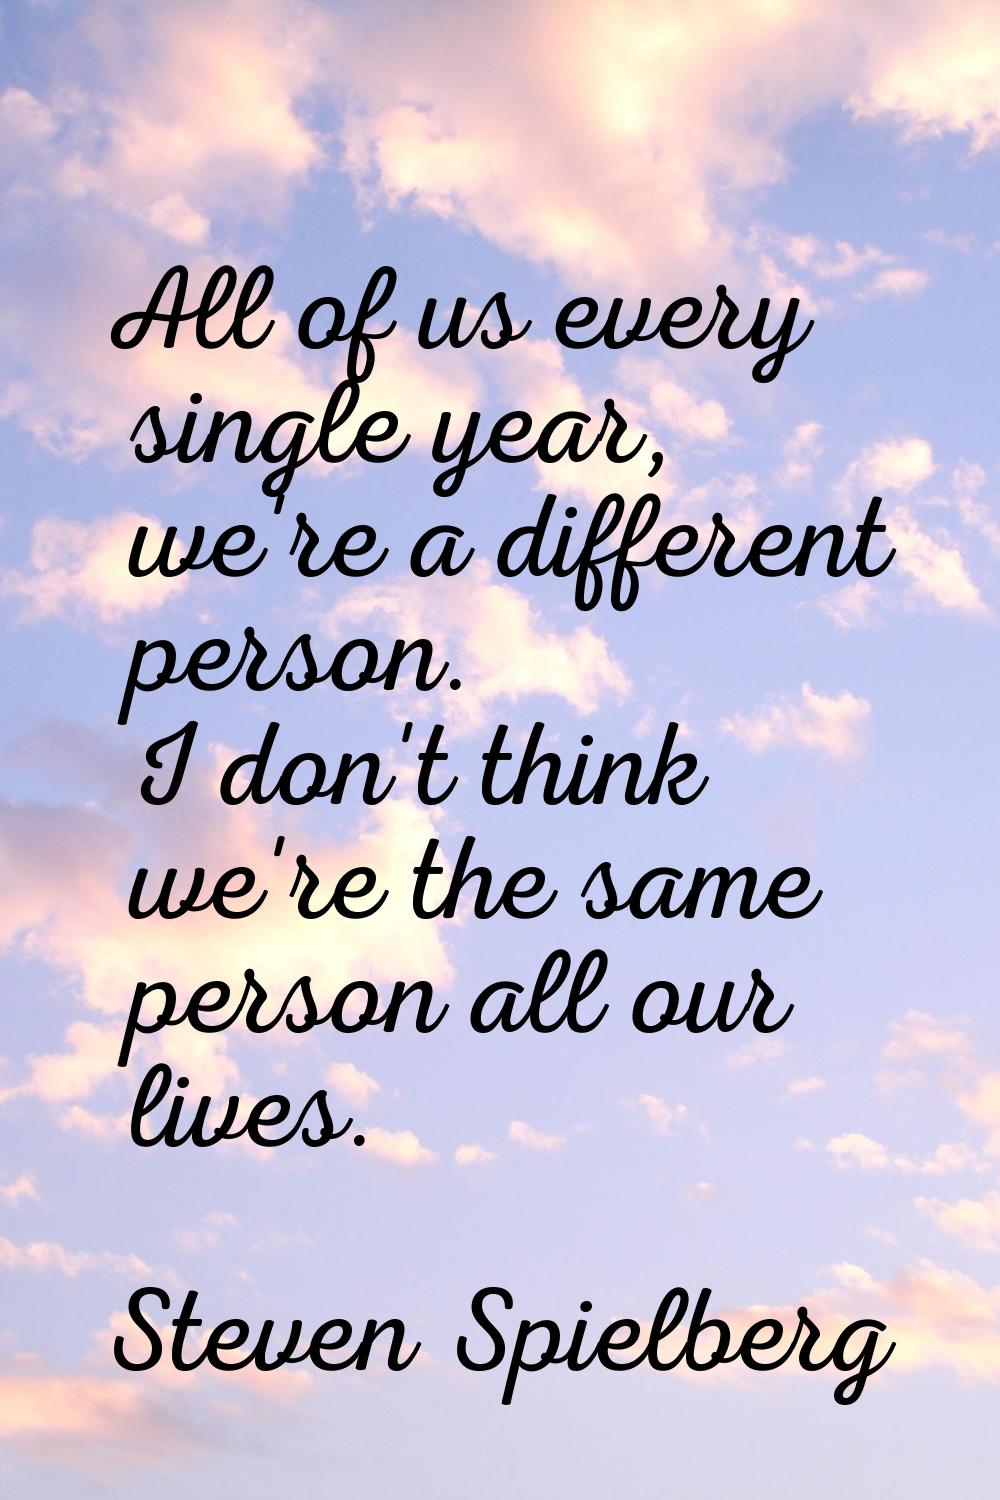 All of us every single year, we're a different person. I don't think we're the same person all our 